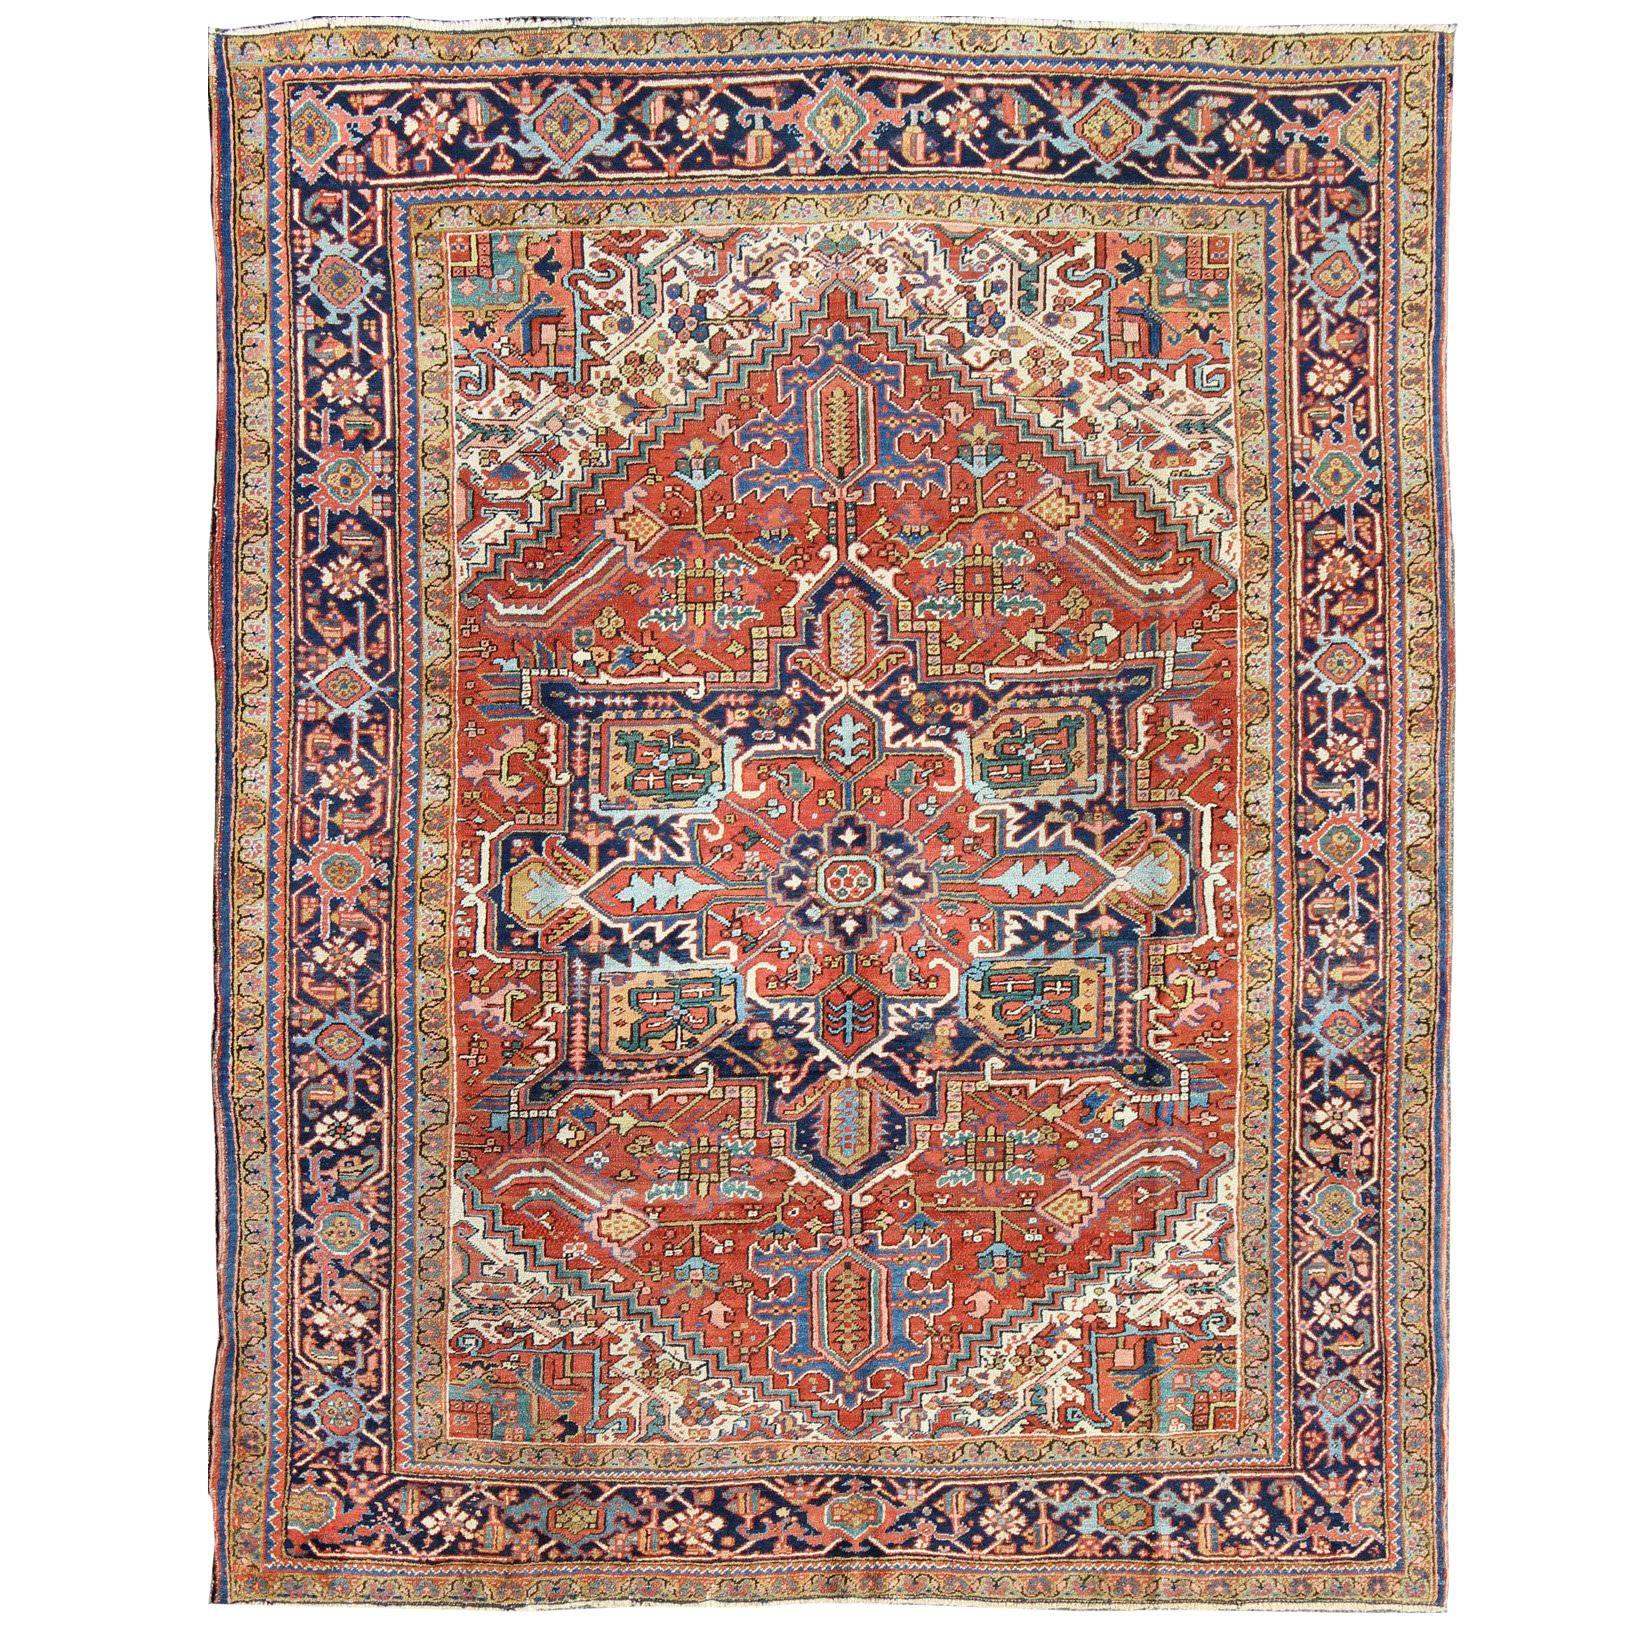 Antique Colorful Persian Heriz Rug with Geometric Patterns and Intricate Design For Sale